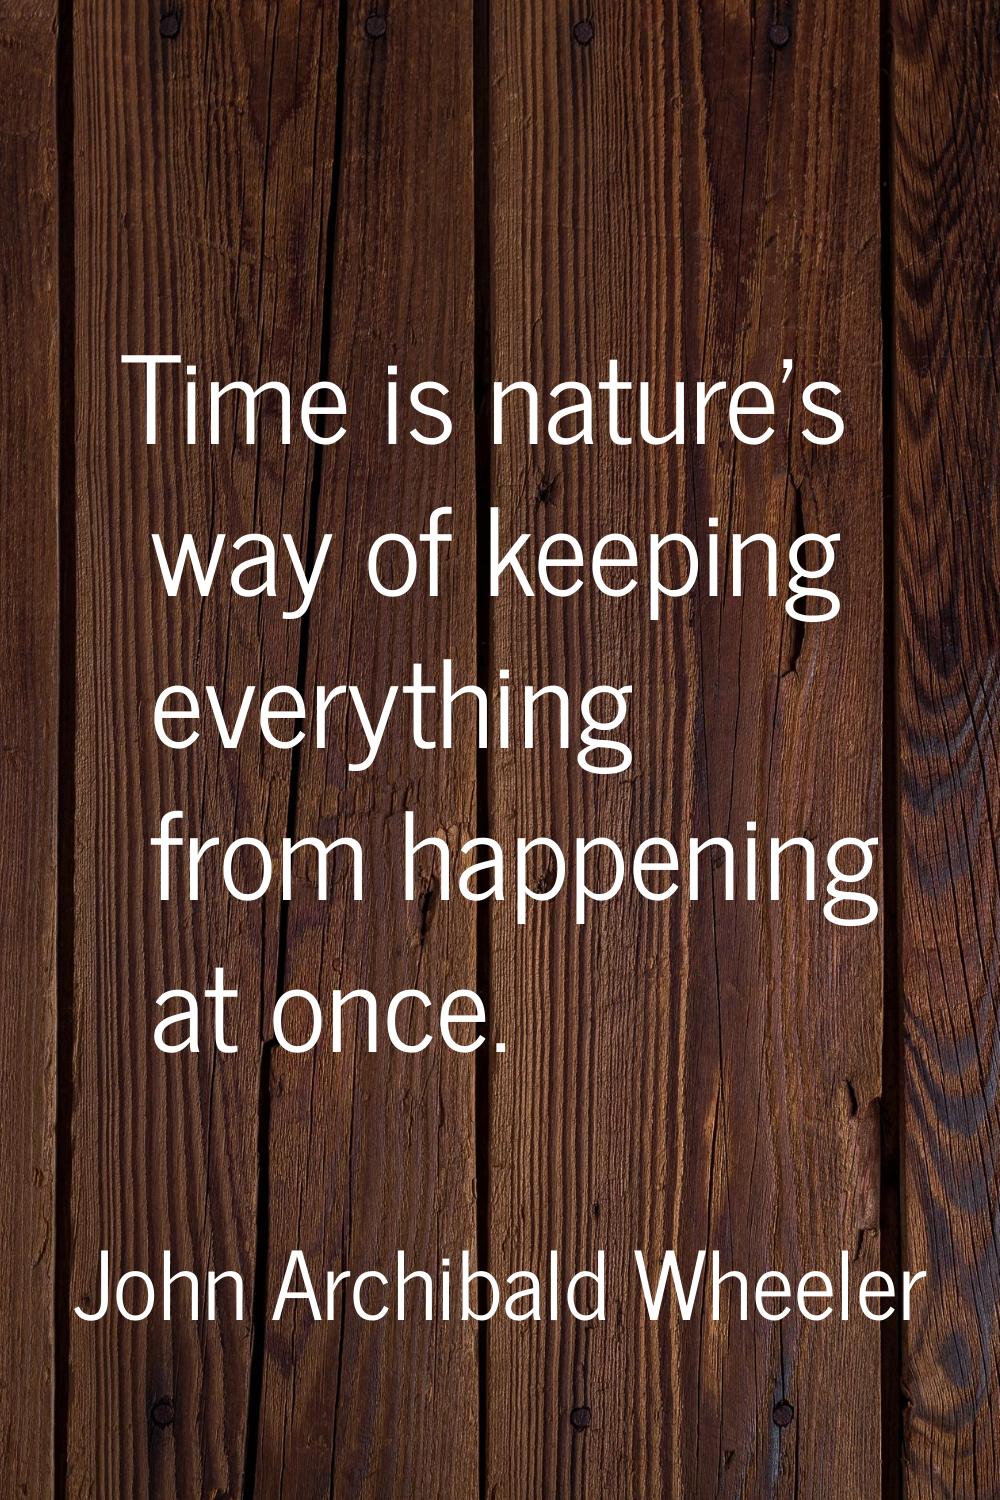 Time is nature's way of keeping everything from happening at once.